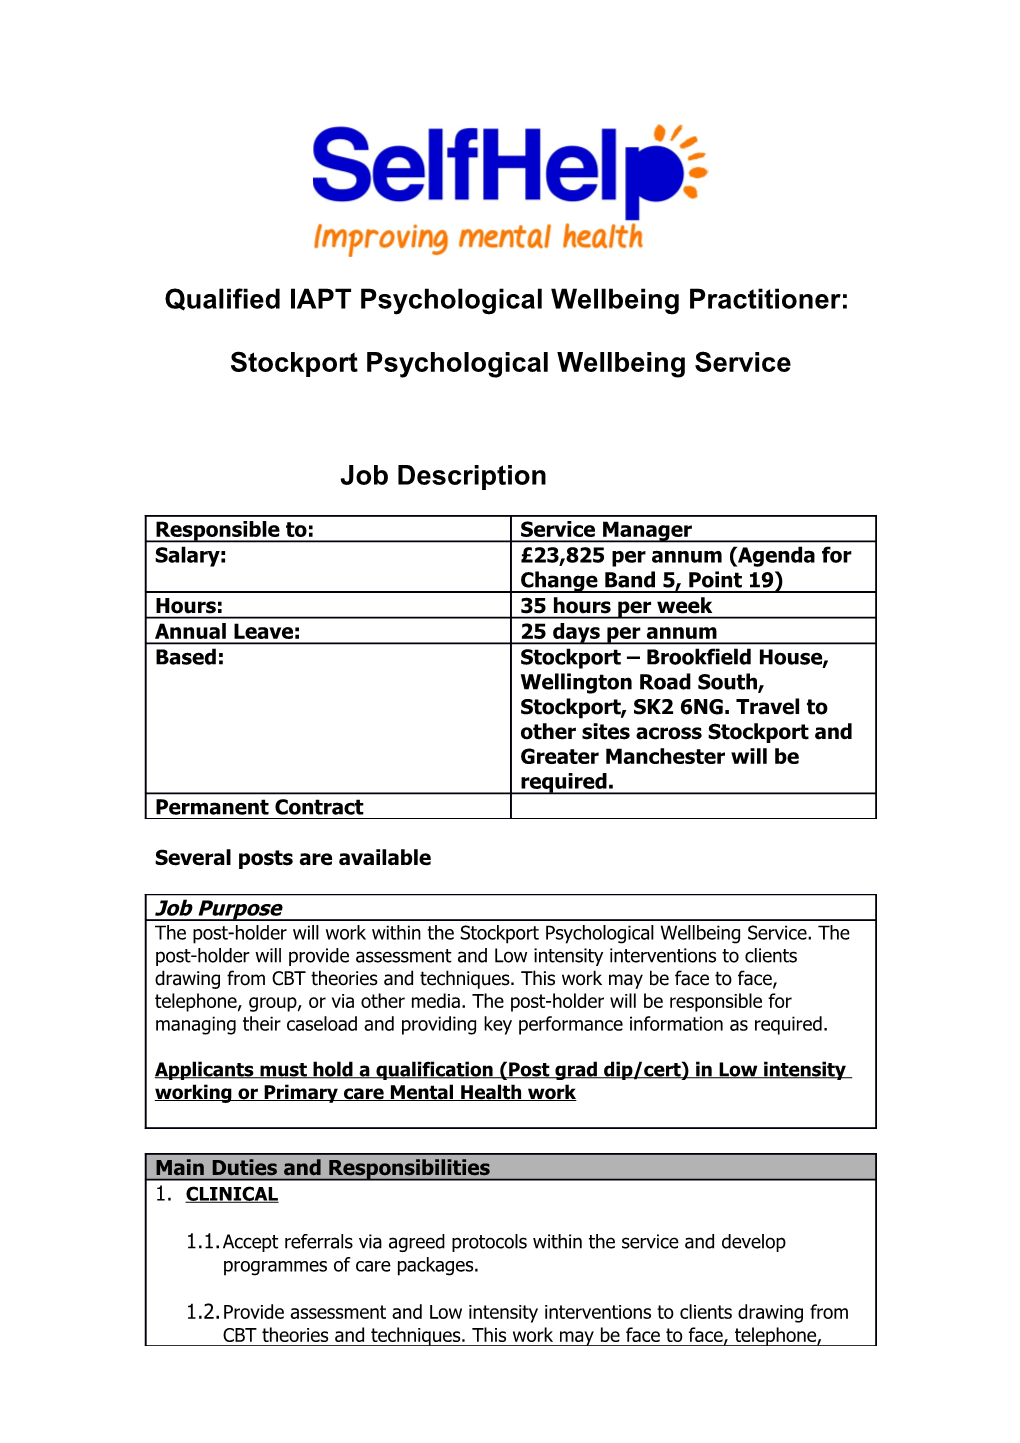 Qualified IAPT Psychological Wellbeing Practitioner